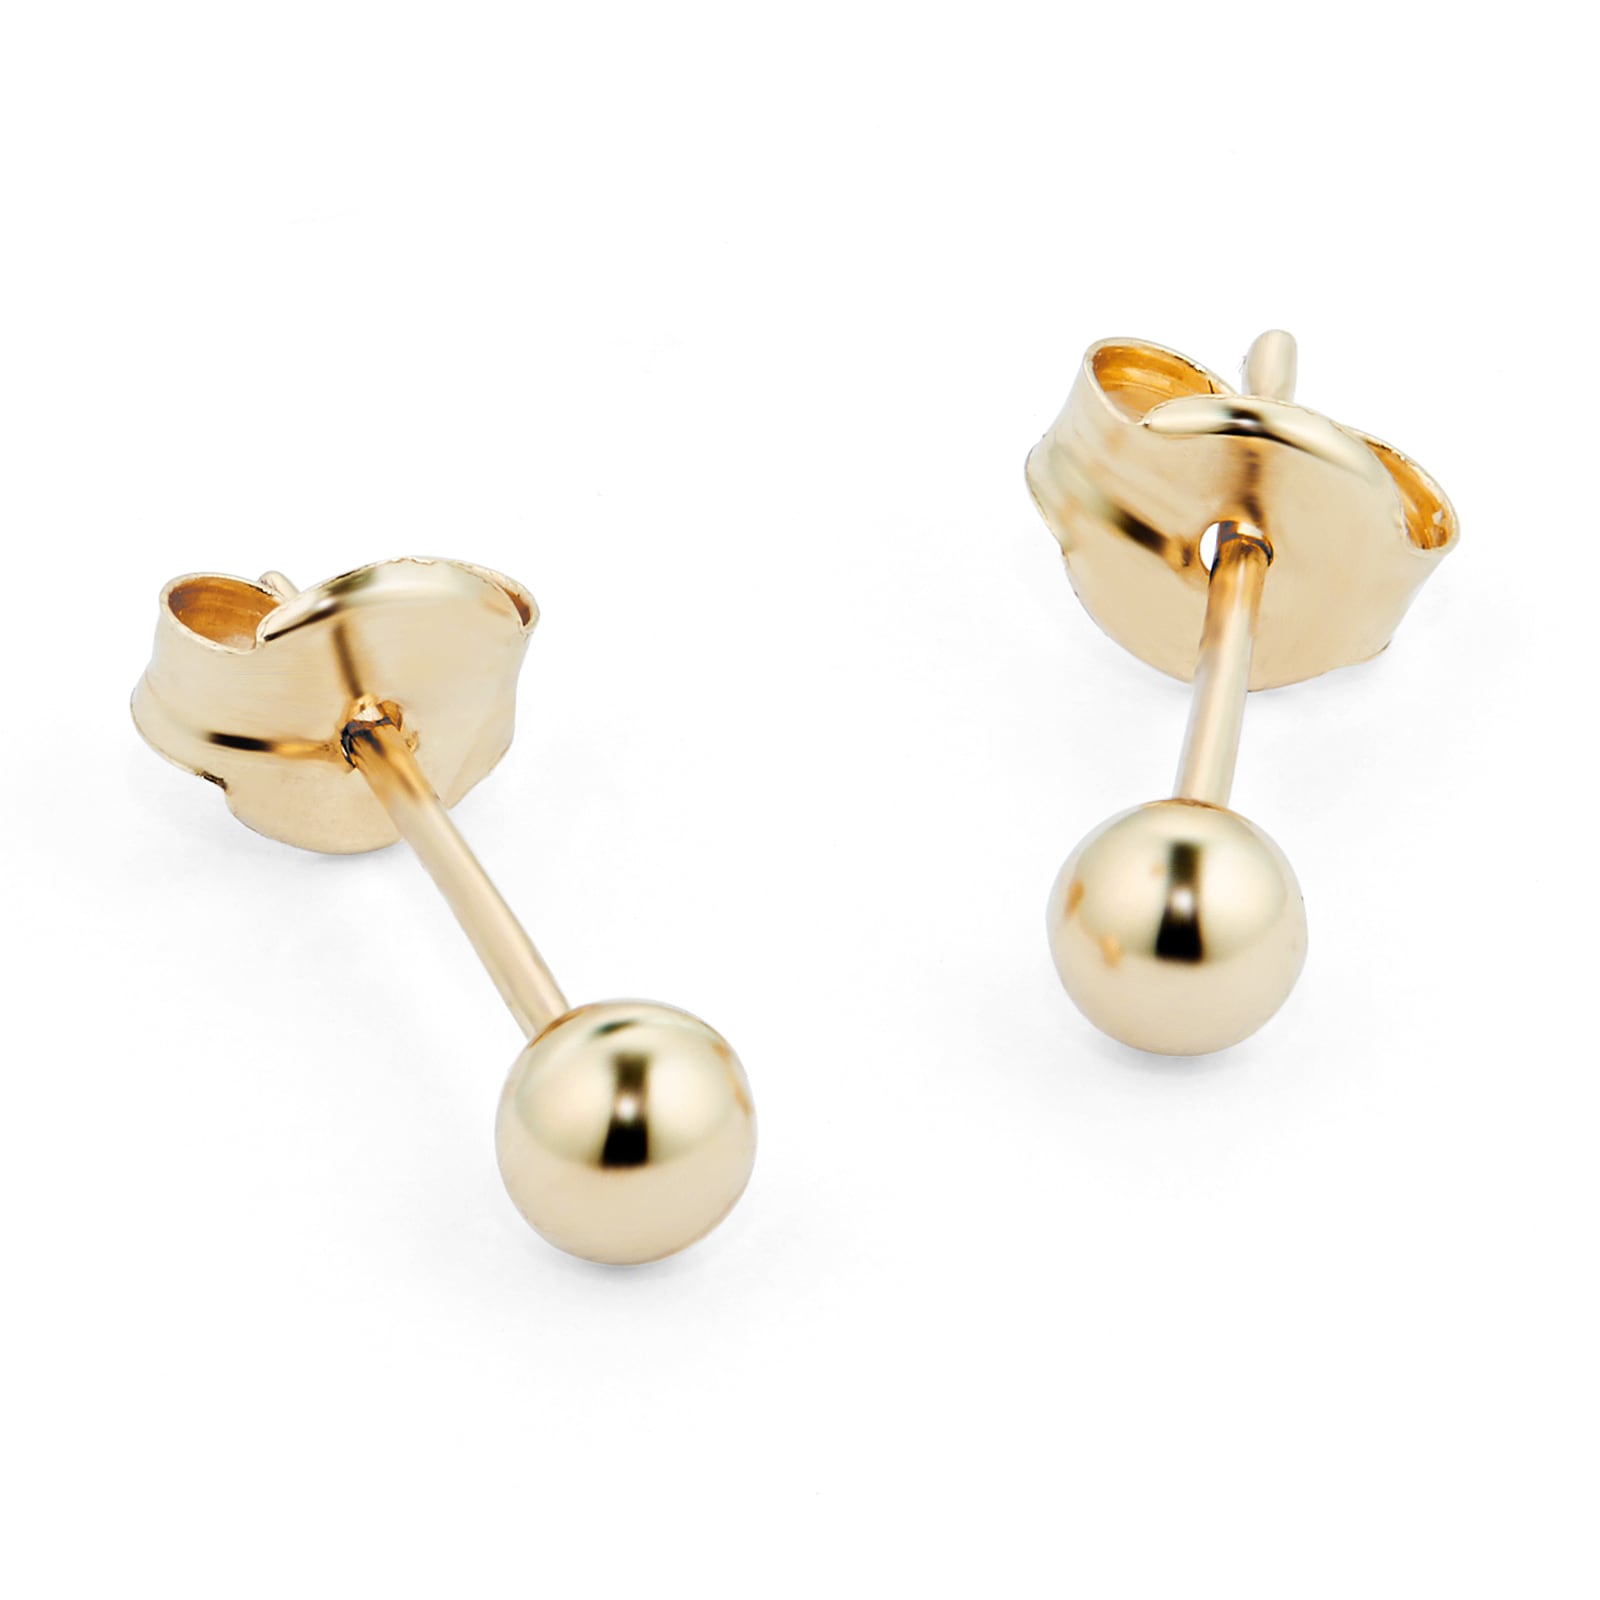 Buy Stainless Steel Ball Stud Earrings  Gold Tone Five Pair Set Jewelry  Sizes 2mm 3mm 4mm 5mm 6mm at Amazonin